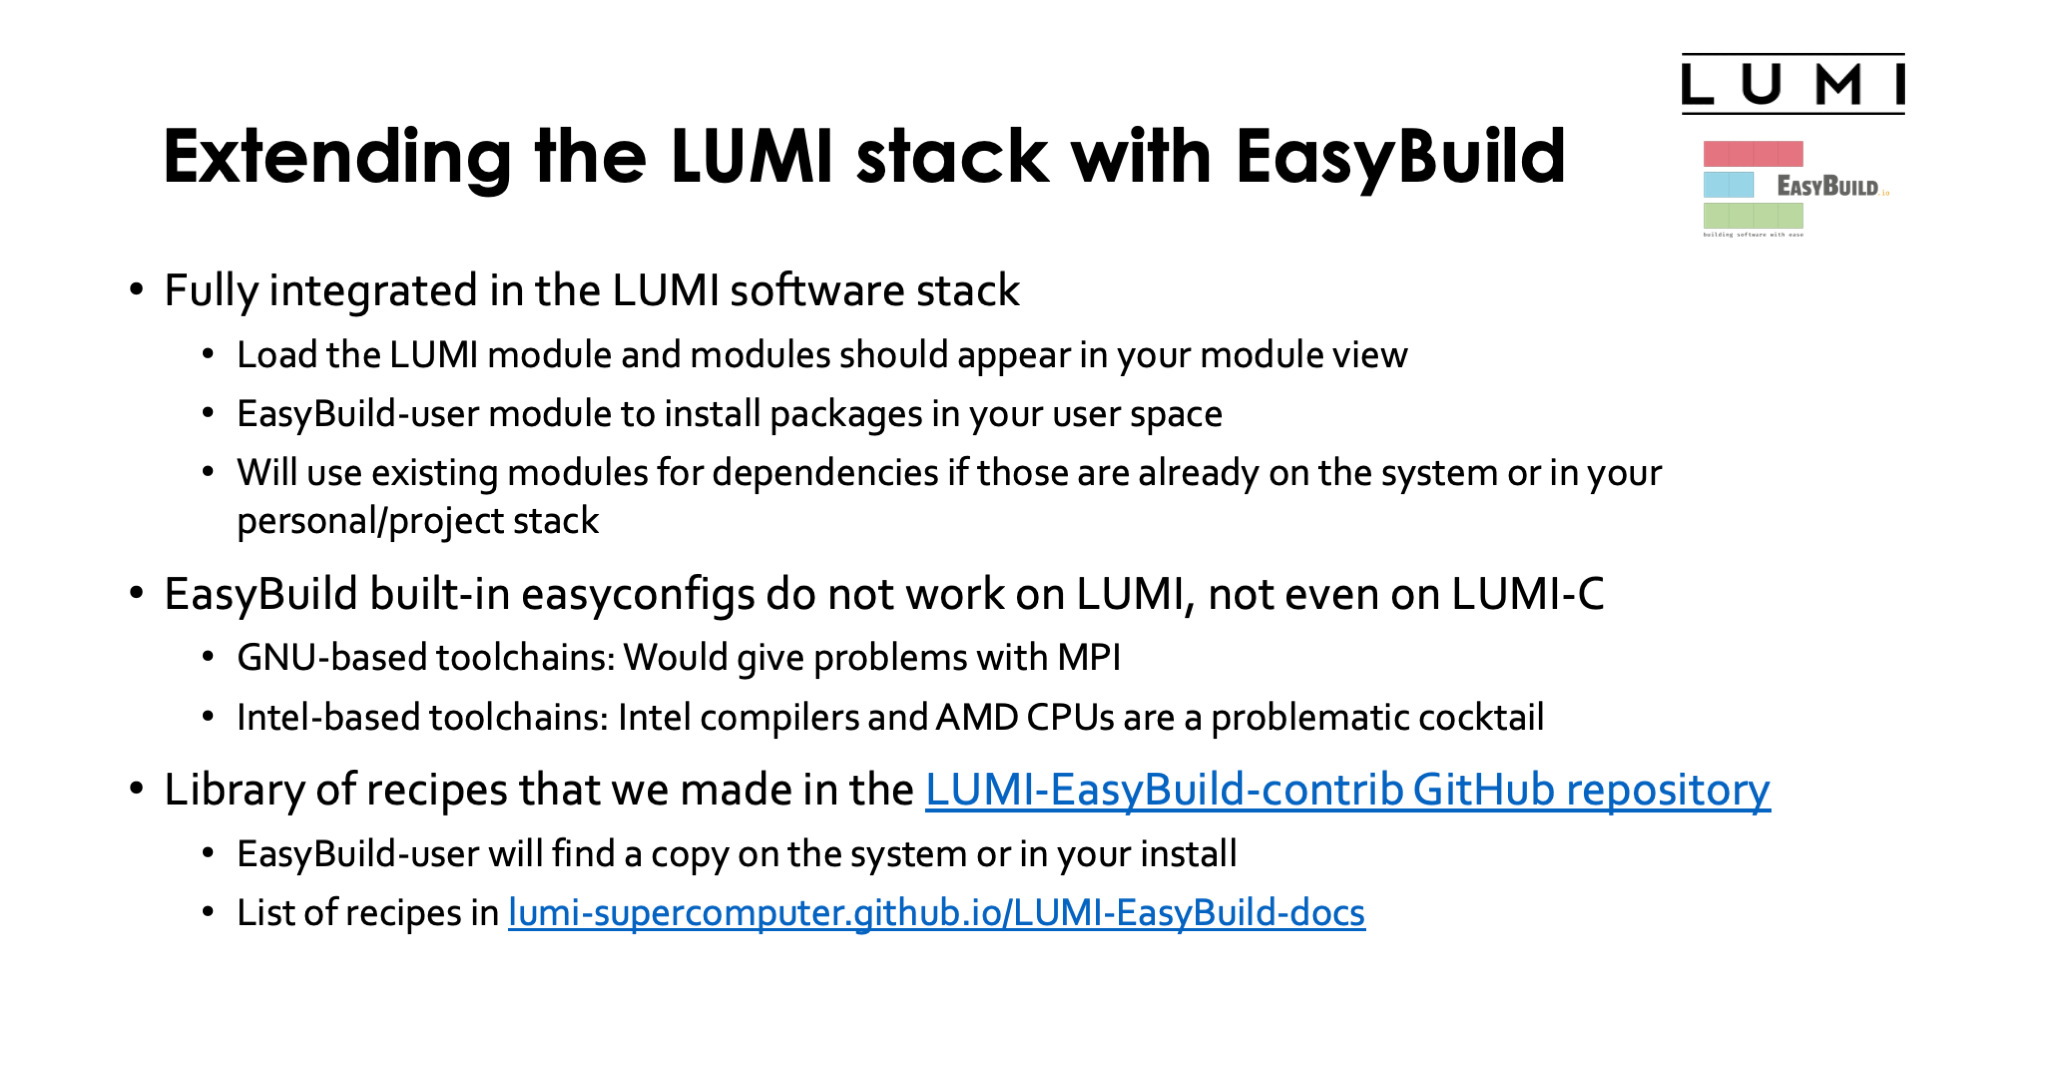 Extending the LUMI stack with EasyBuild